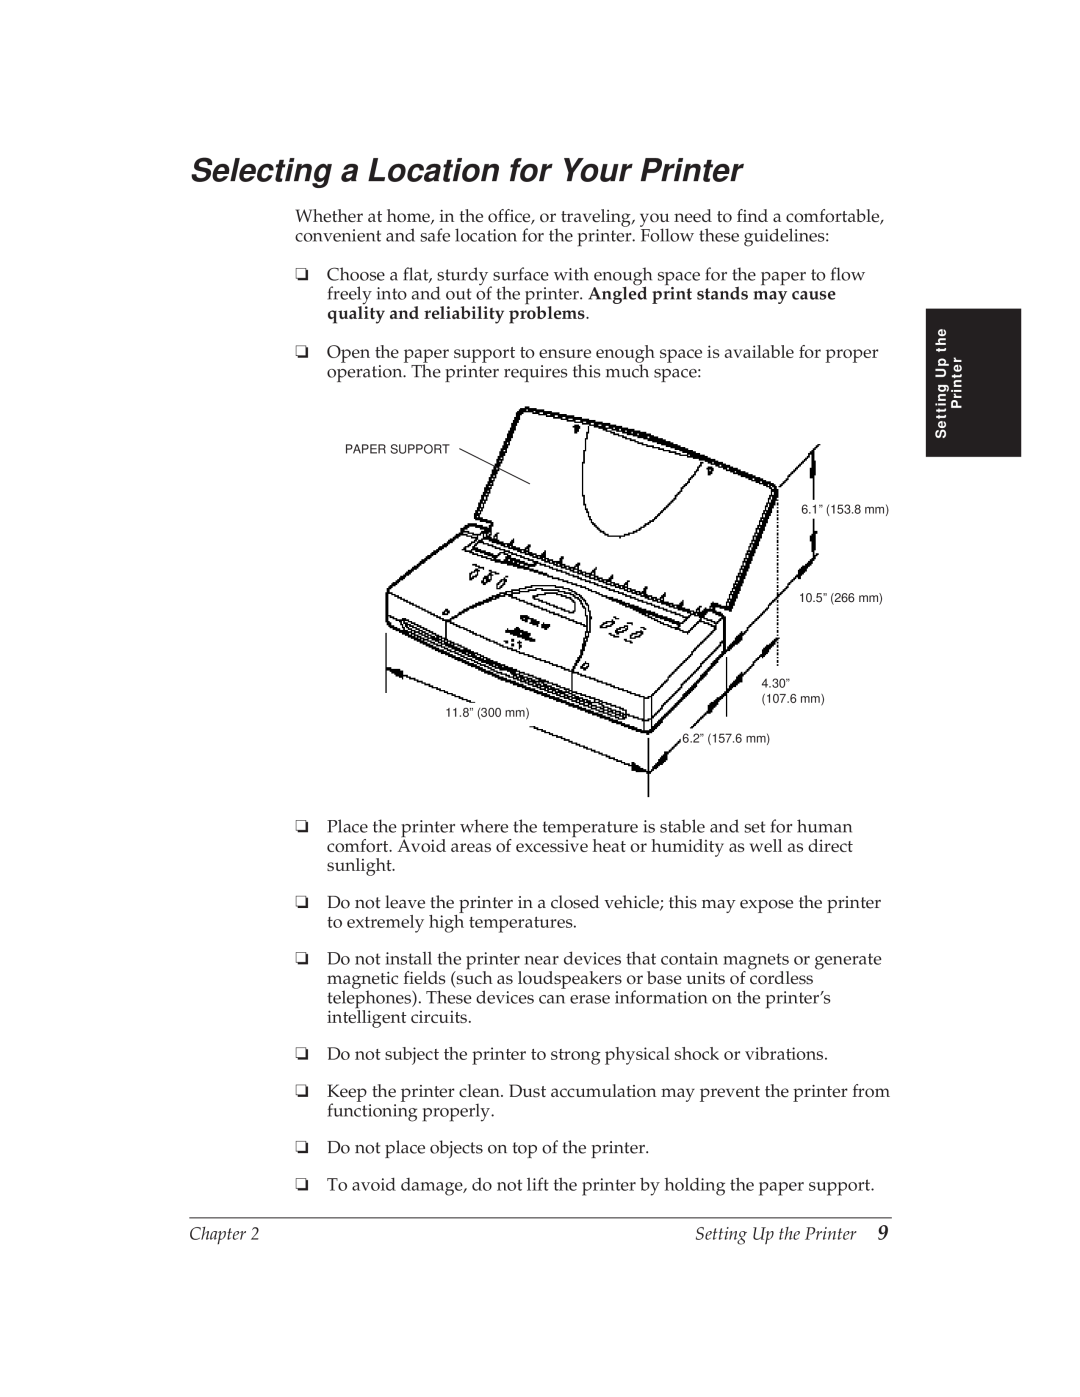 Canon BJ-30 manual Selecting a Location for Your Printer 